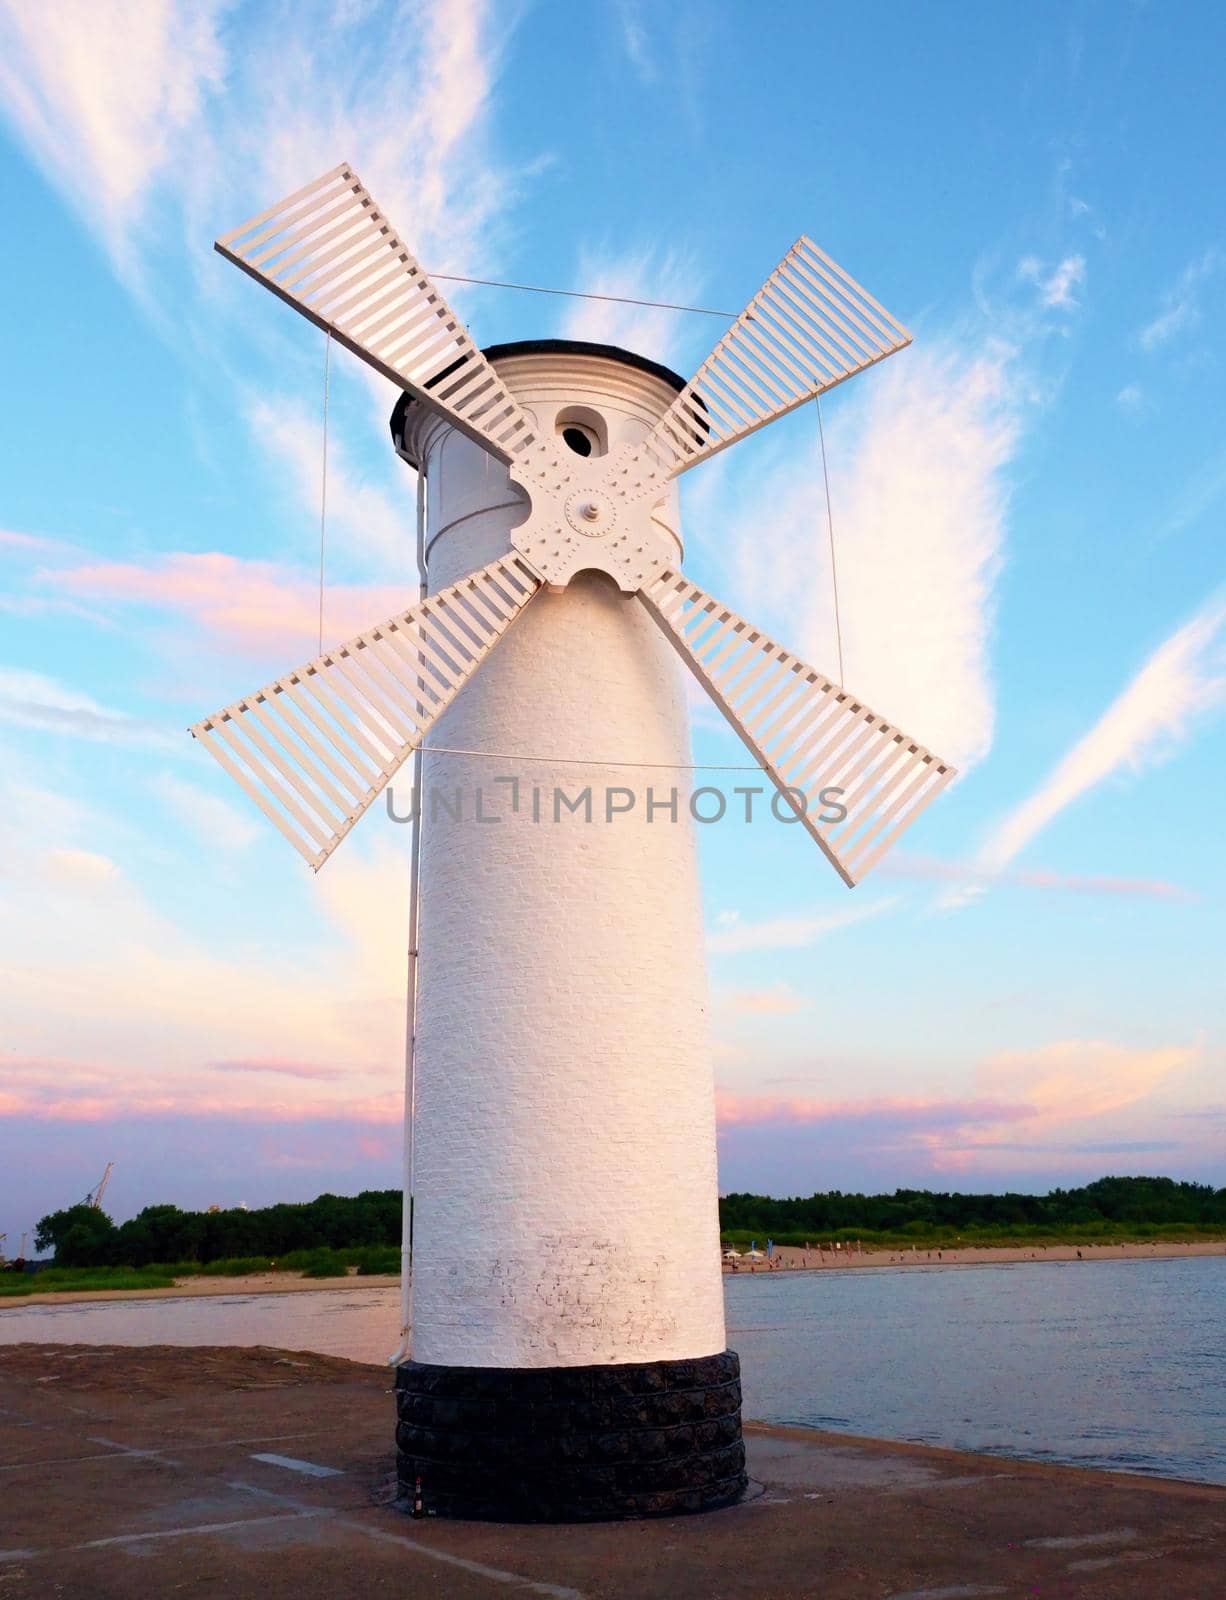 White windmill by sea on rocky coast. Seascape and landscape by rdonar2